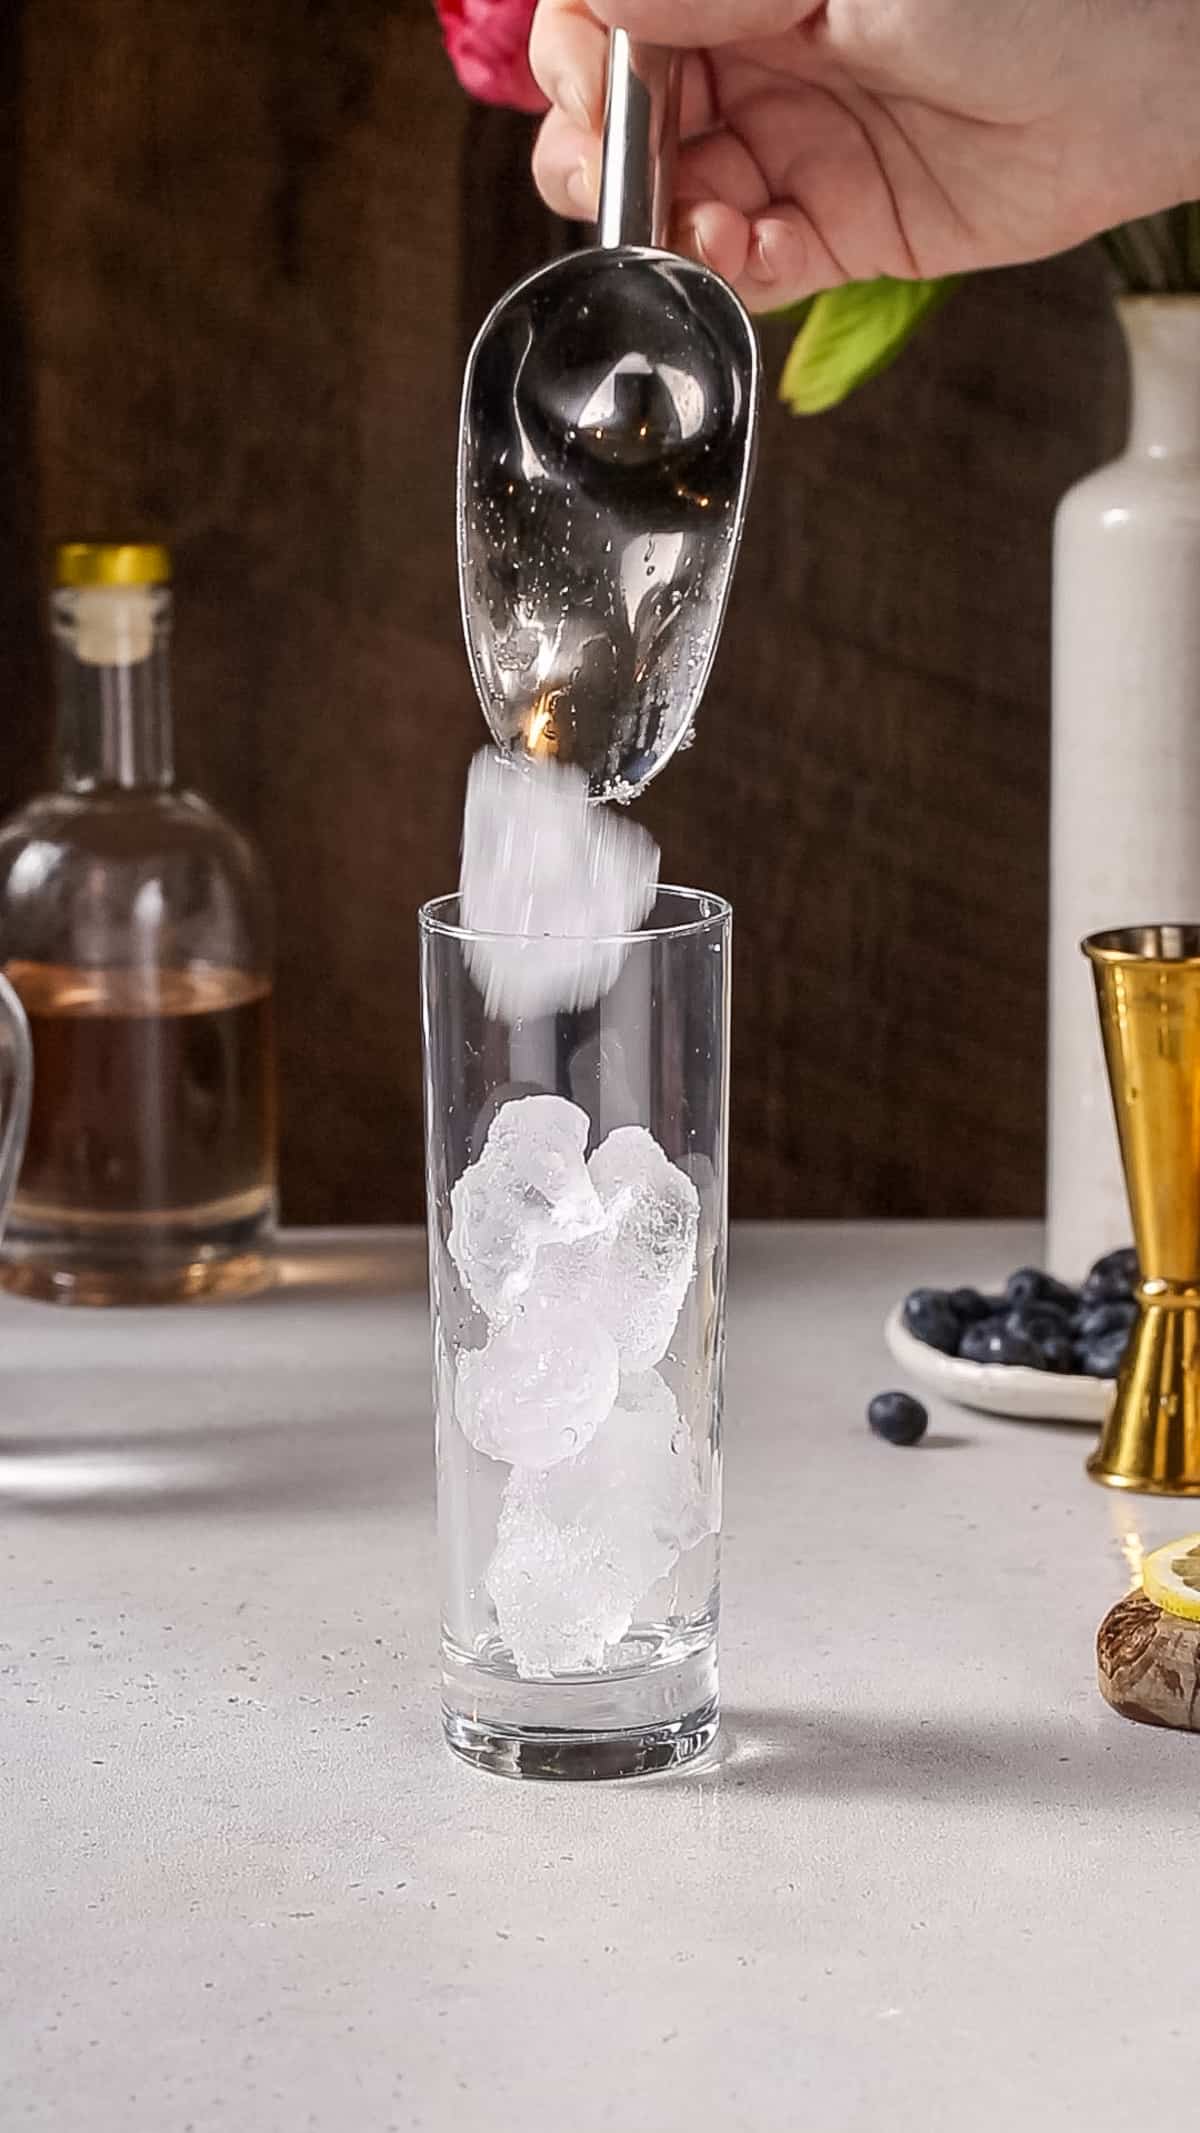 Hand using an ice scoop to fill a cocktail glass with ice.